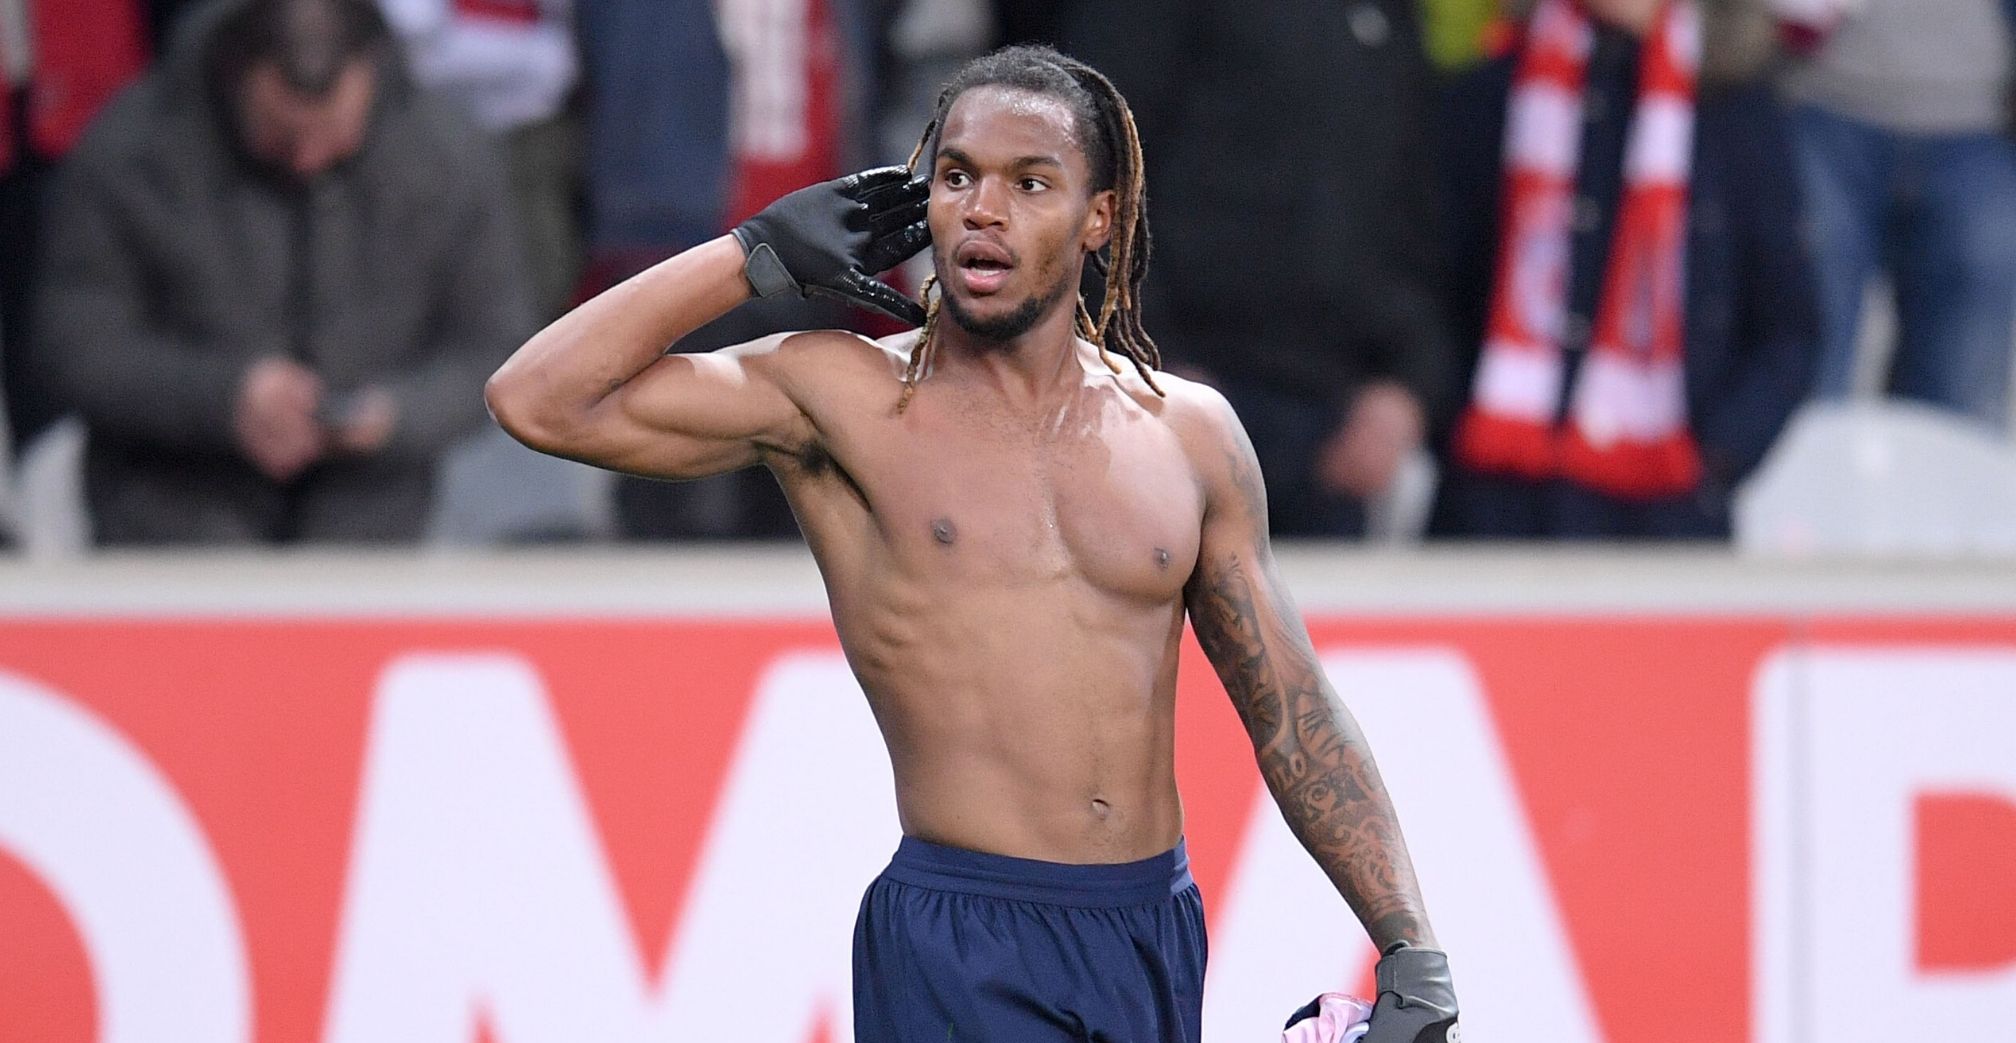 Renato Sanches and the top 5 surprises of 2019-20